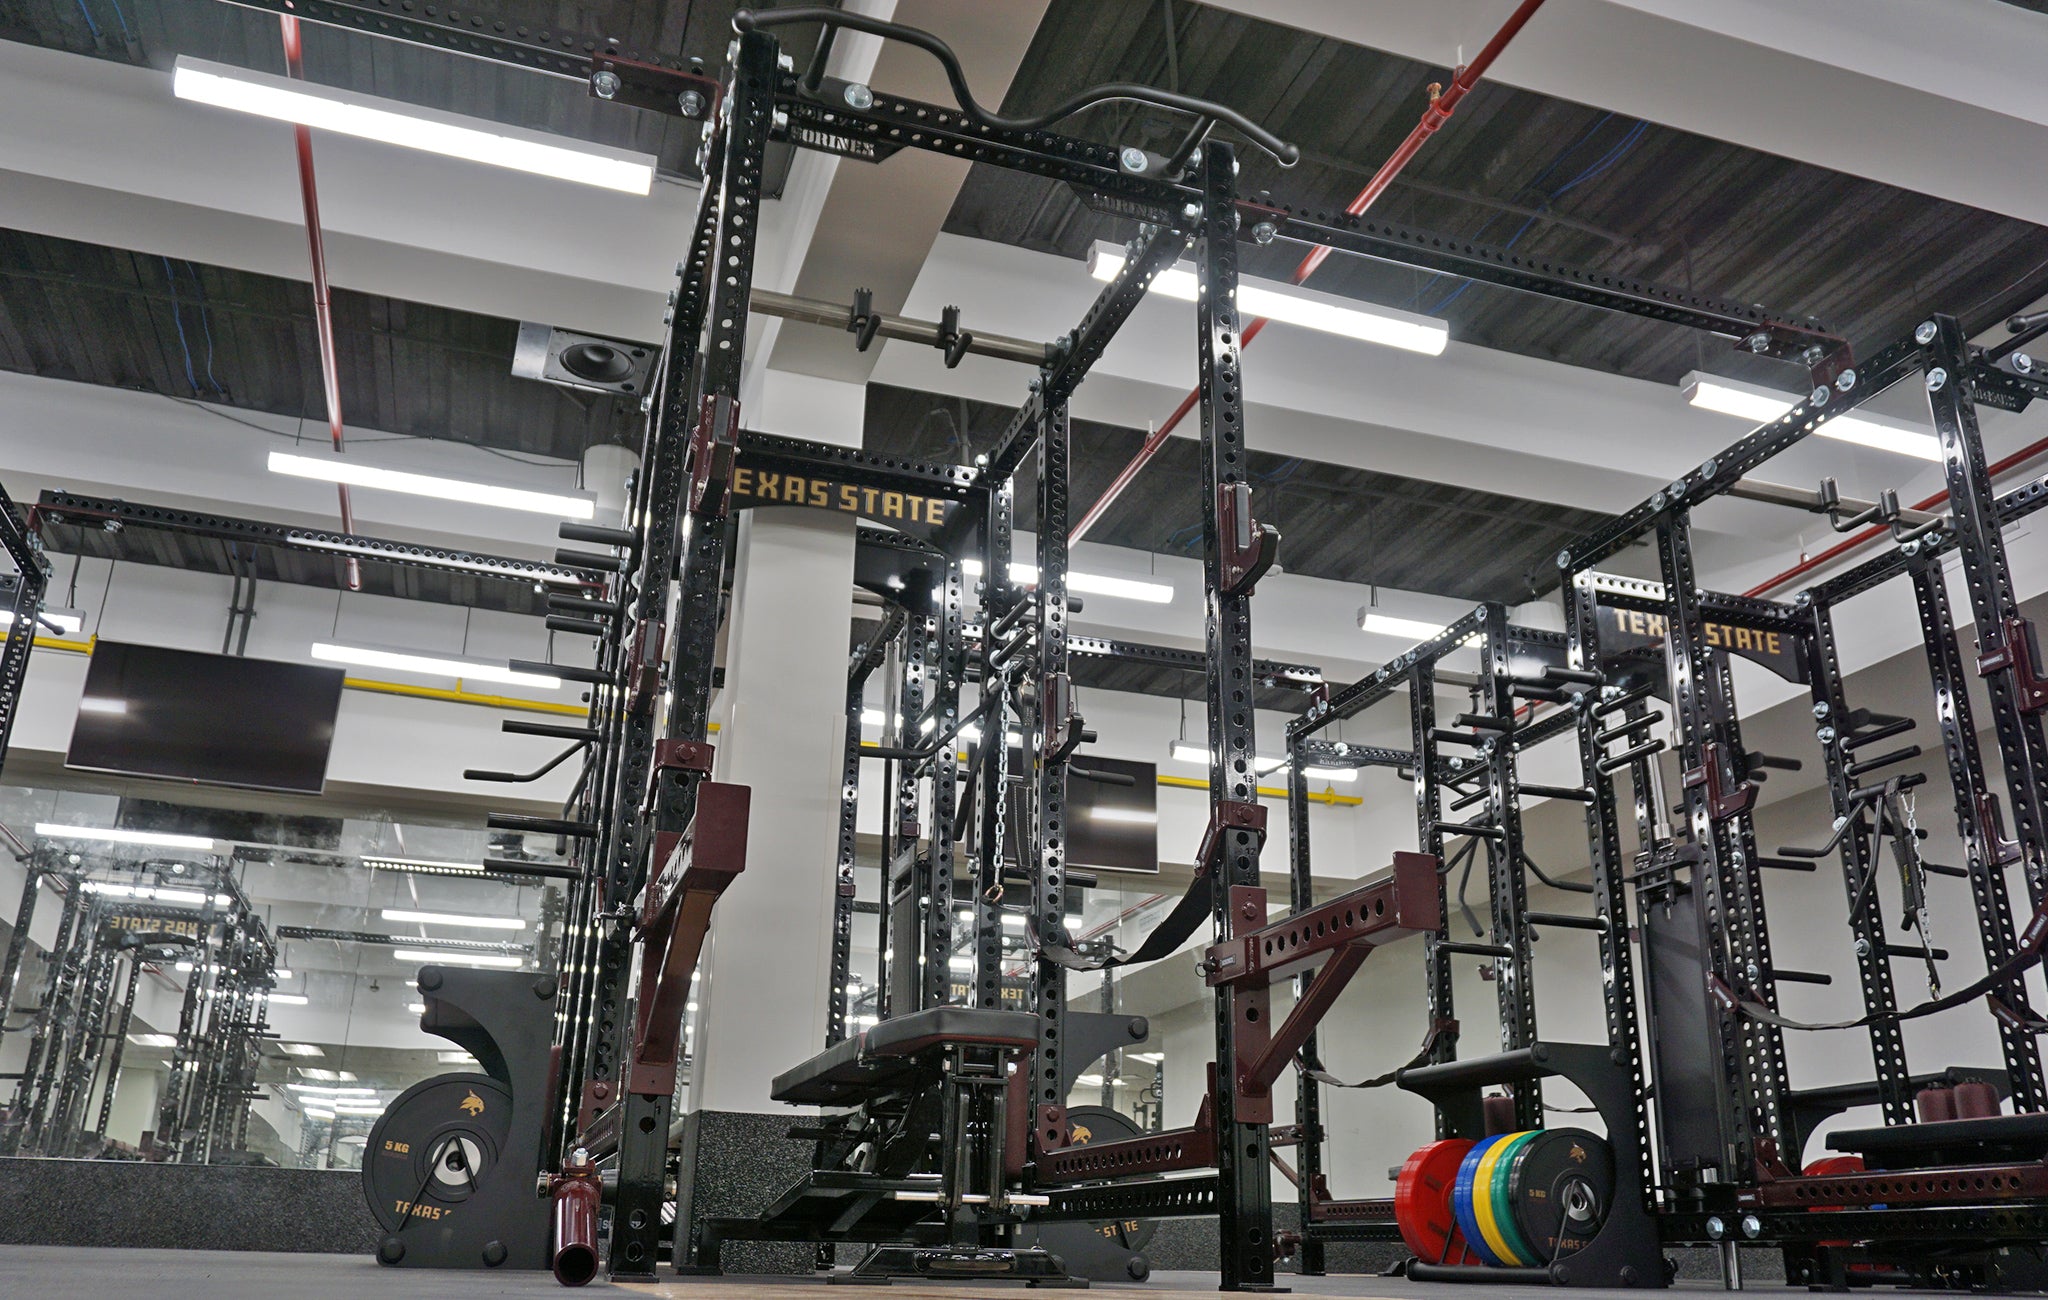 Texas State University strength and conditioning